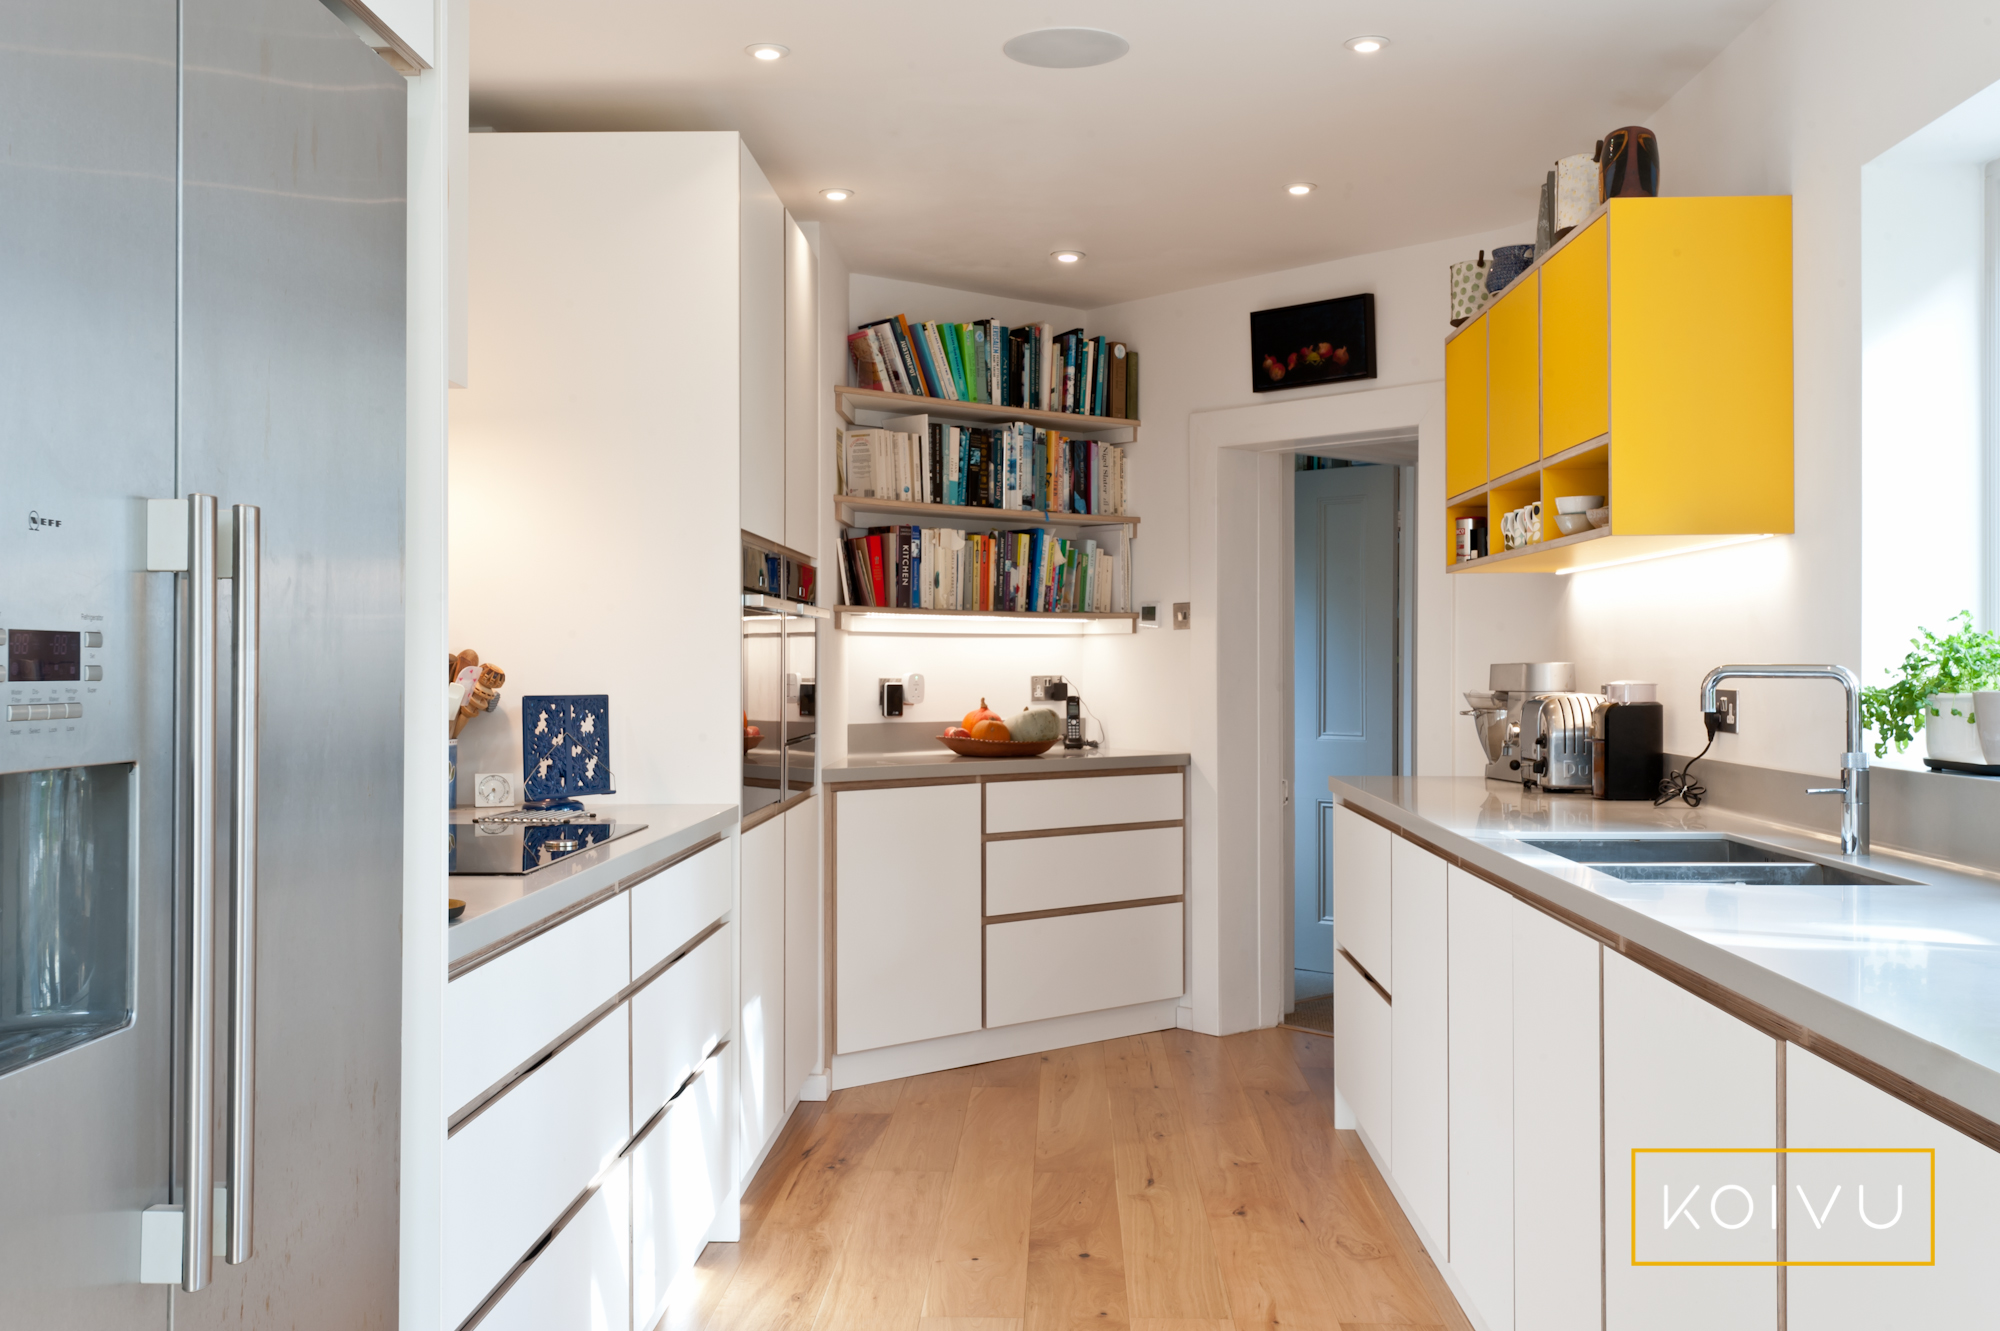 Bespoke designed plywood kitchen with white and yellow units. Designed by Koivu.